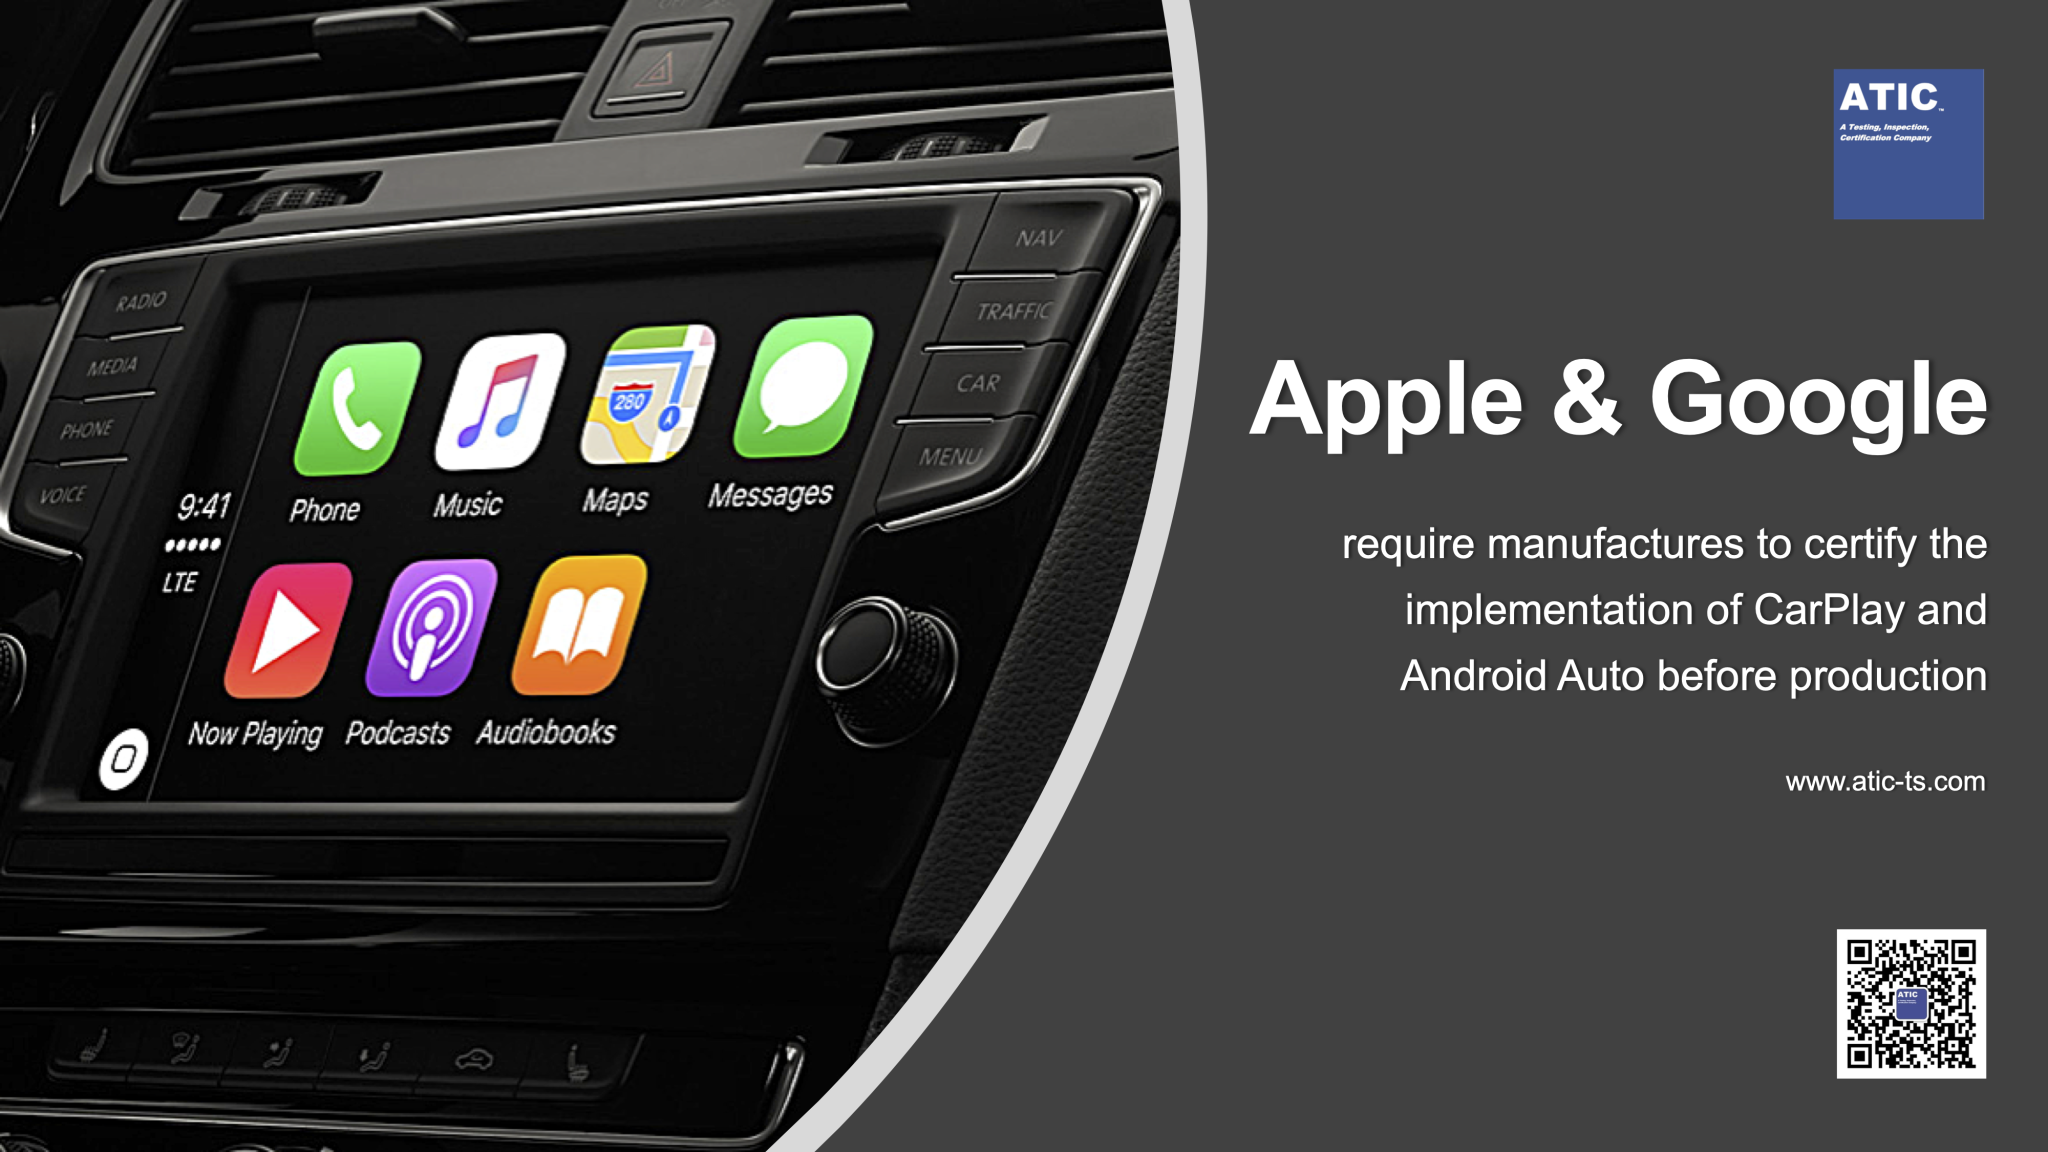 INTRODUCTION OF CARPLAY AND GOOGLE ANDROID AUTO CERTIFICATION